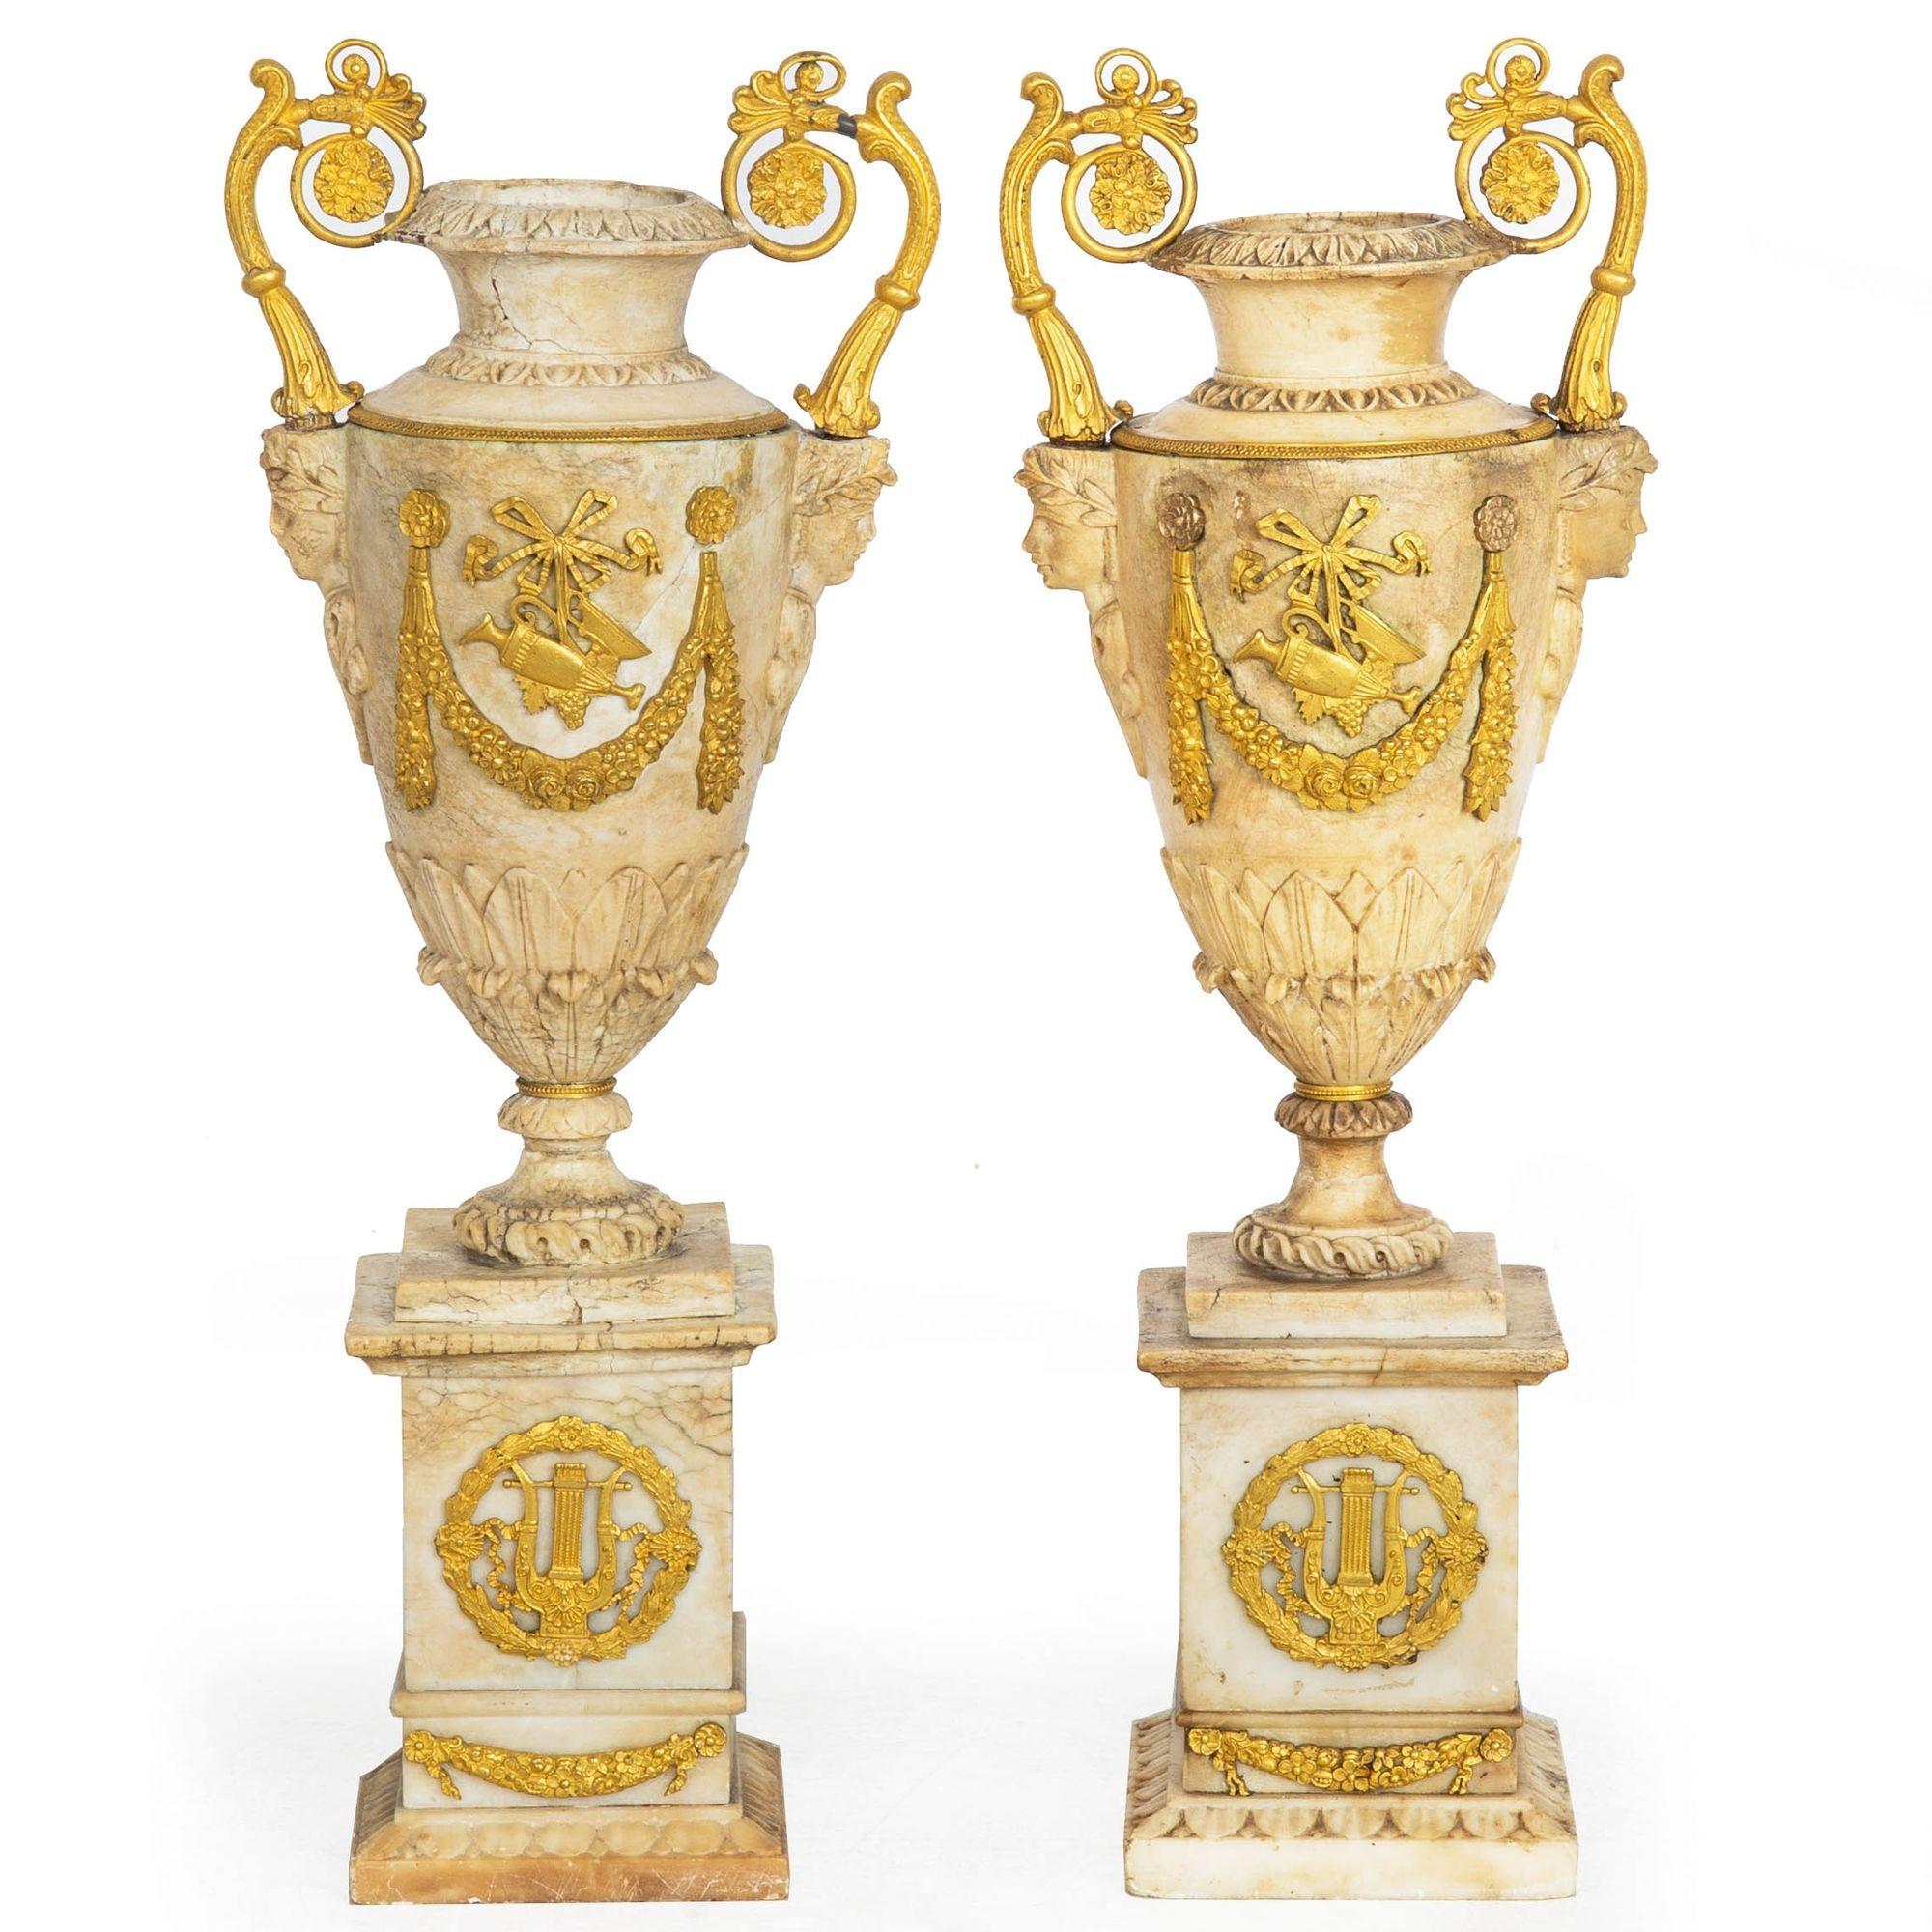 FINE PAIR OF CHARLES X GILT-BRONZE MOUNTED CARVED ALABASTER VASES
Circa second quarter of 19th century
Item # 311XIP09Q

A fabulous pair of Charles X period alabaster vases from the second quarter of the 19th century, they feature brilliant crisply